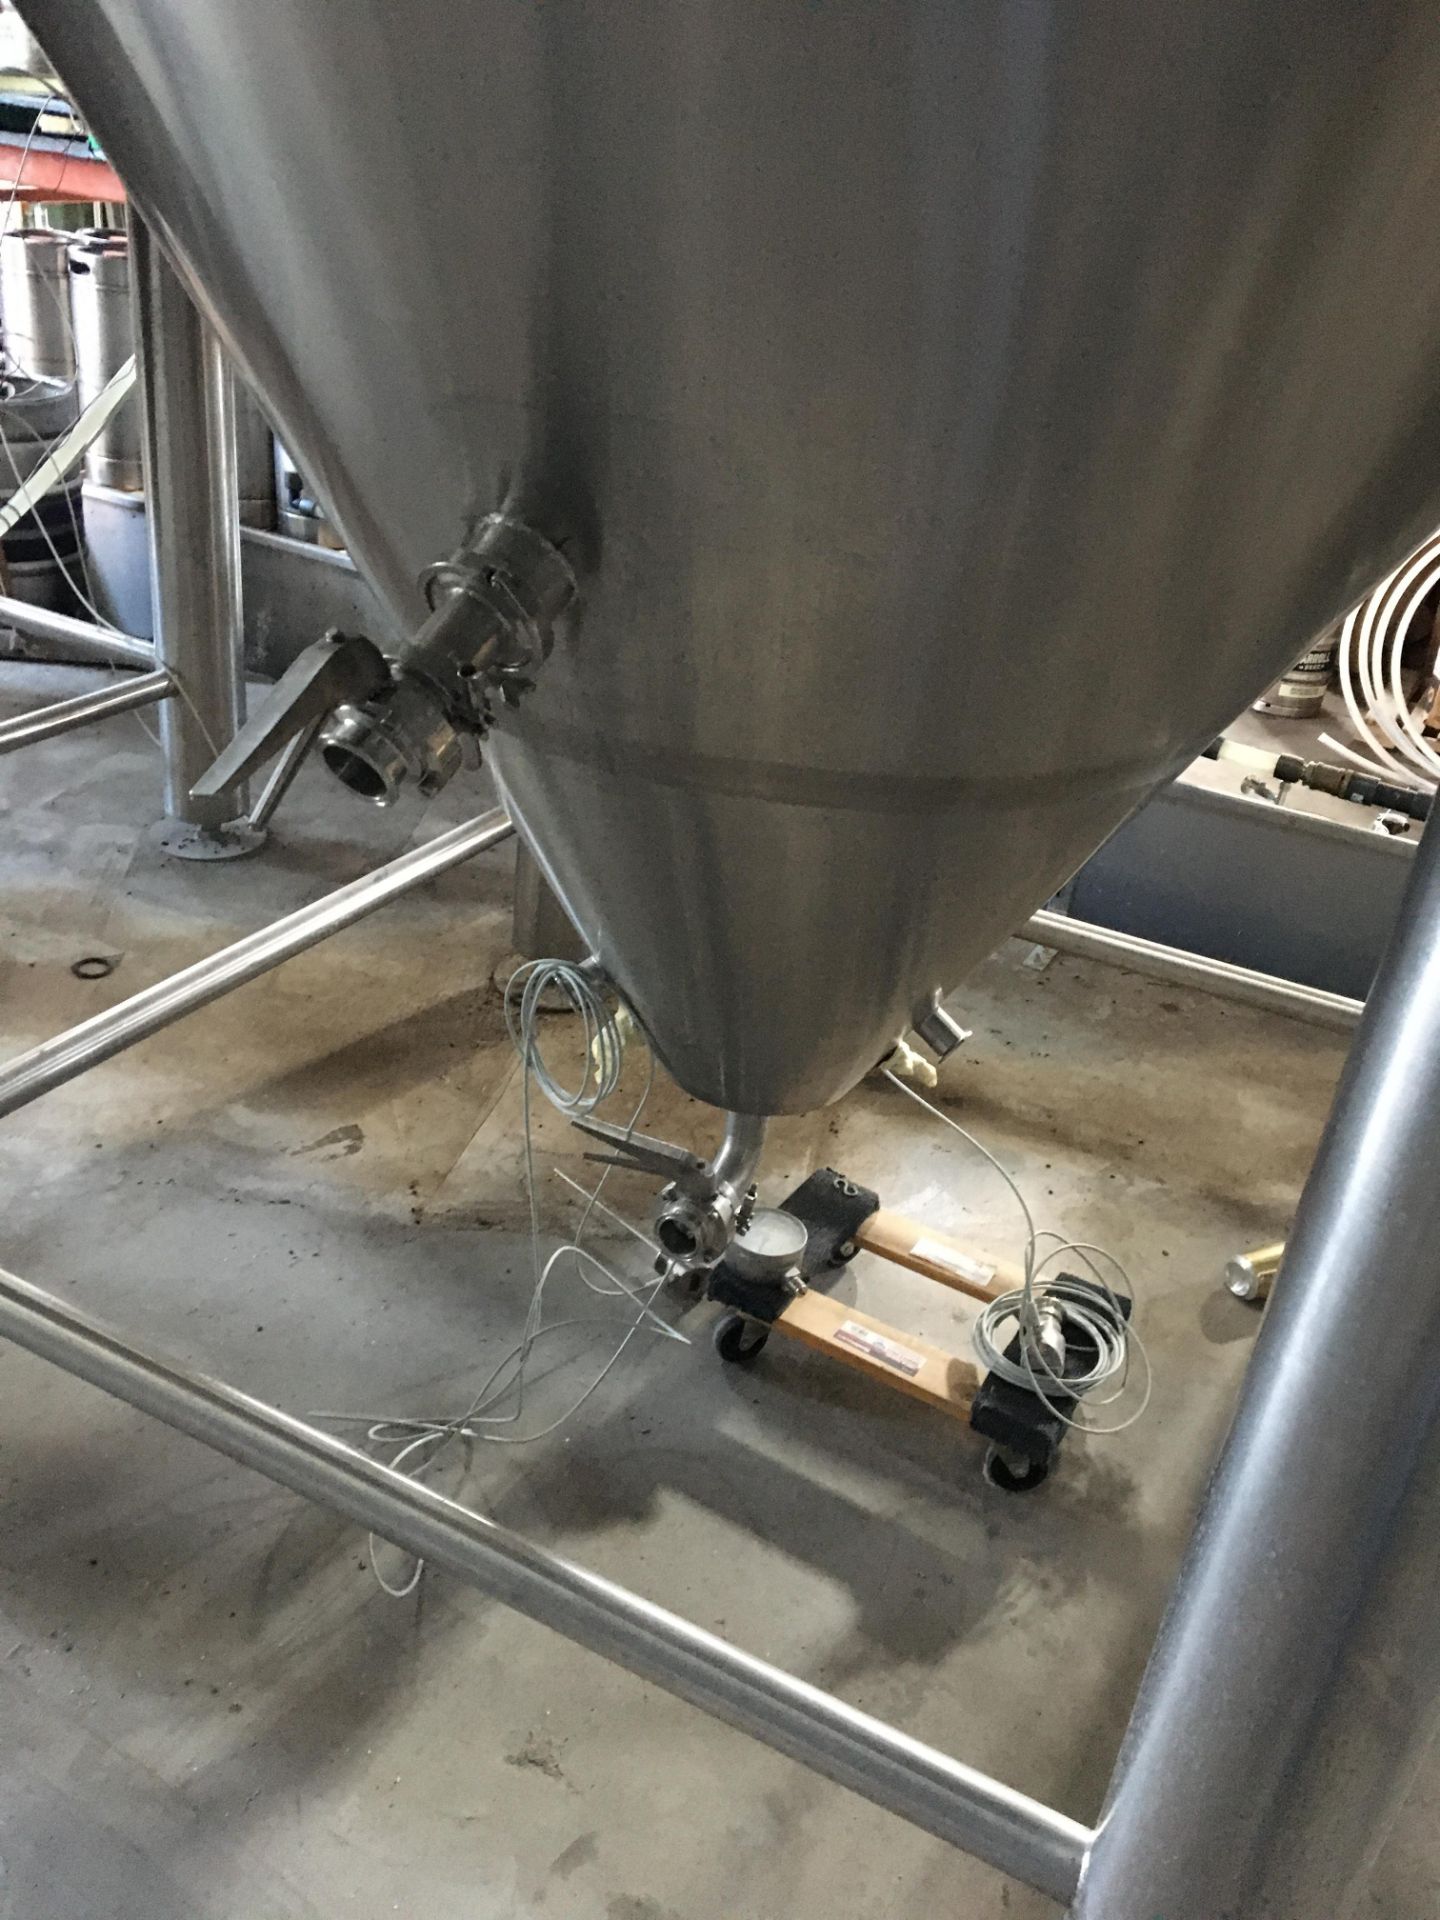 80-BBL Minnetonka Fermentation Tank, Model 80-BBL, Year 2017, Stainless Steel; Vessel store wort and - Image 6 of 8